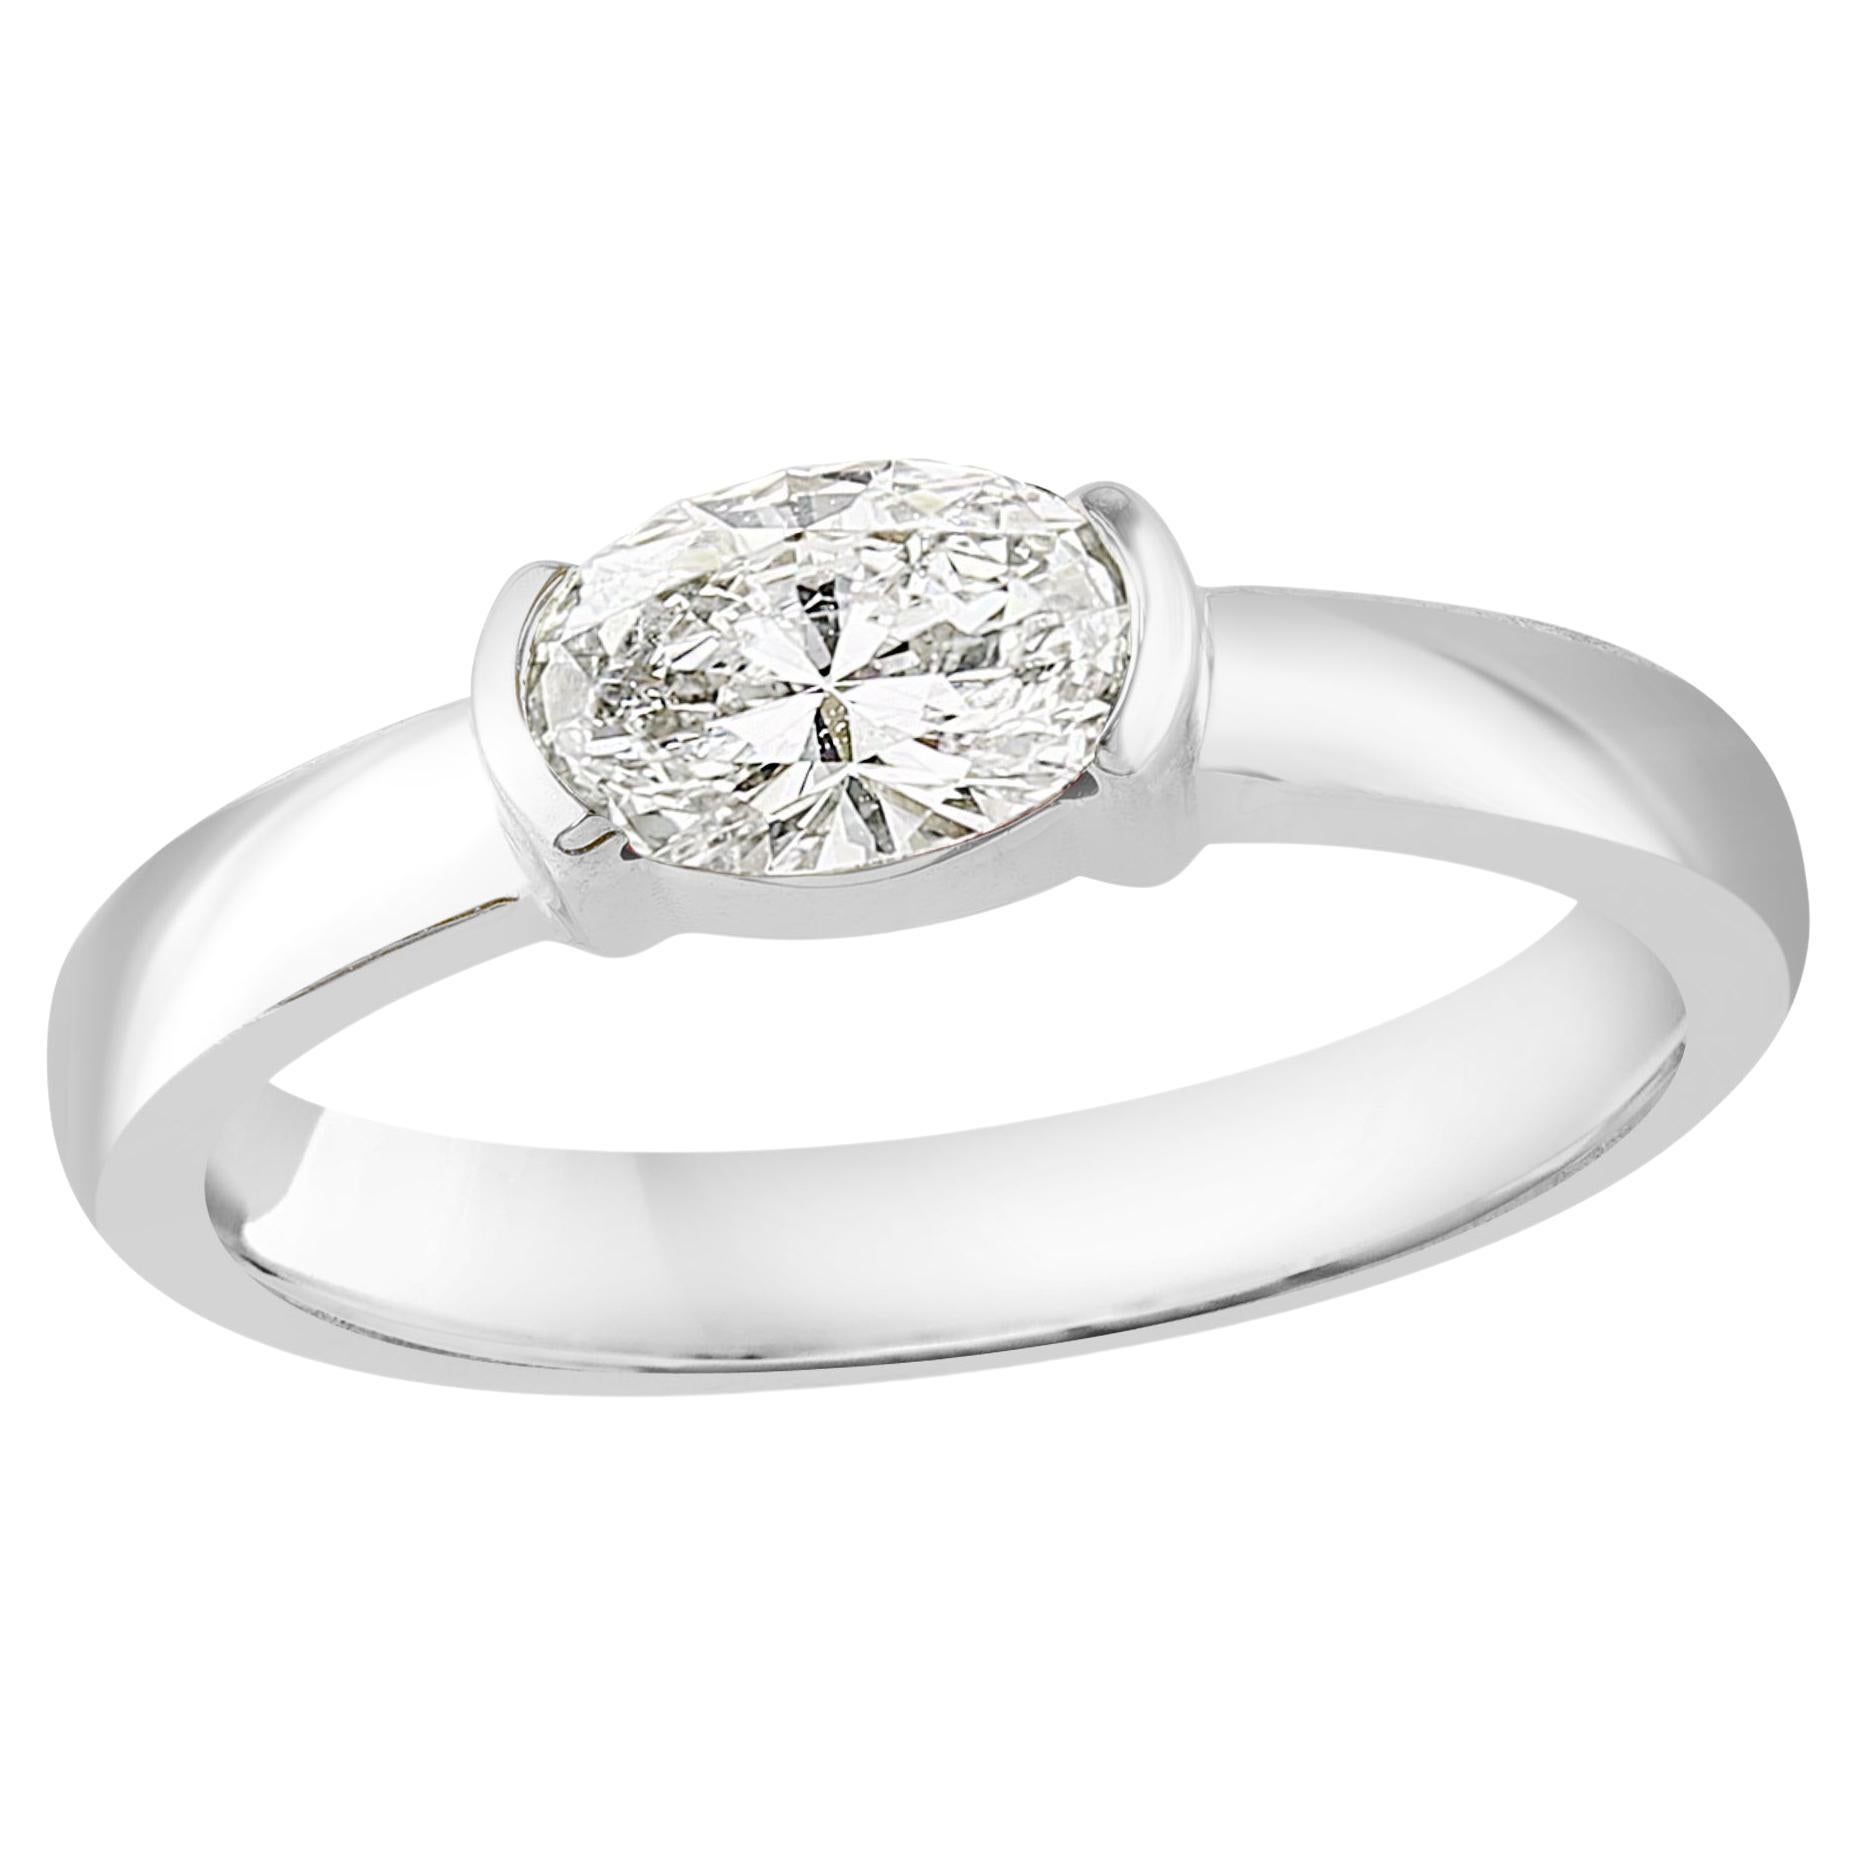 0.70 Carat Oval Cut Diamond Band Ring in 14K White Gold For Sale